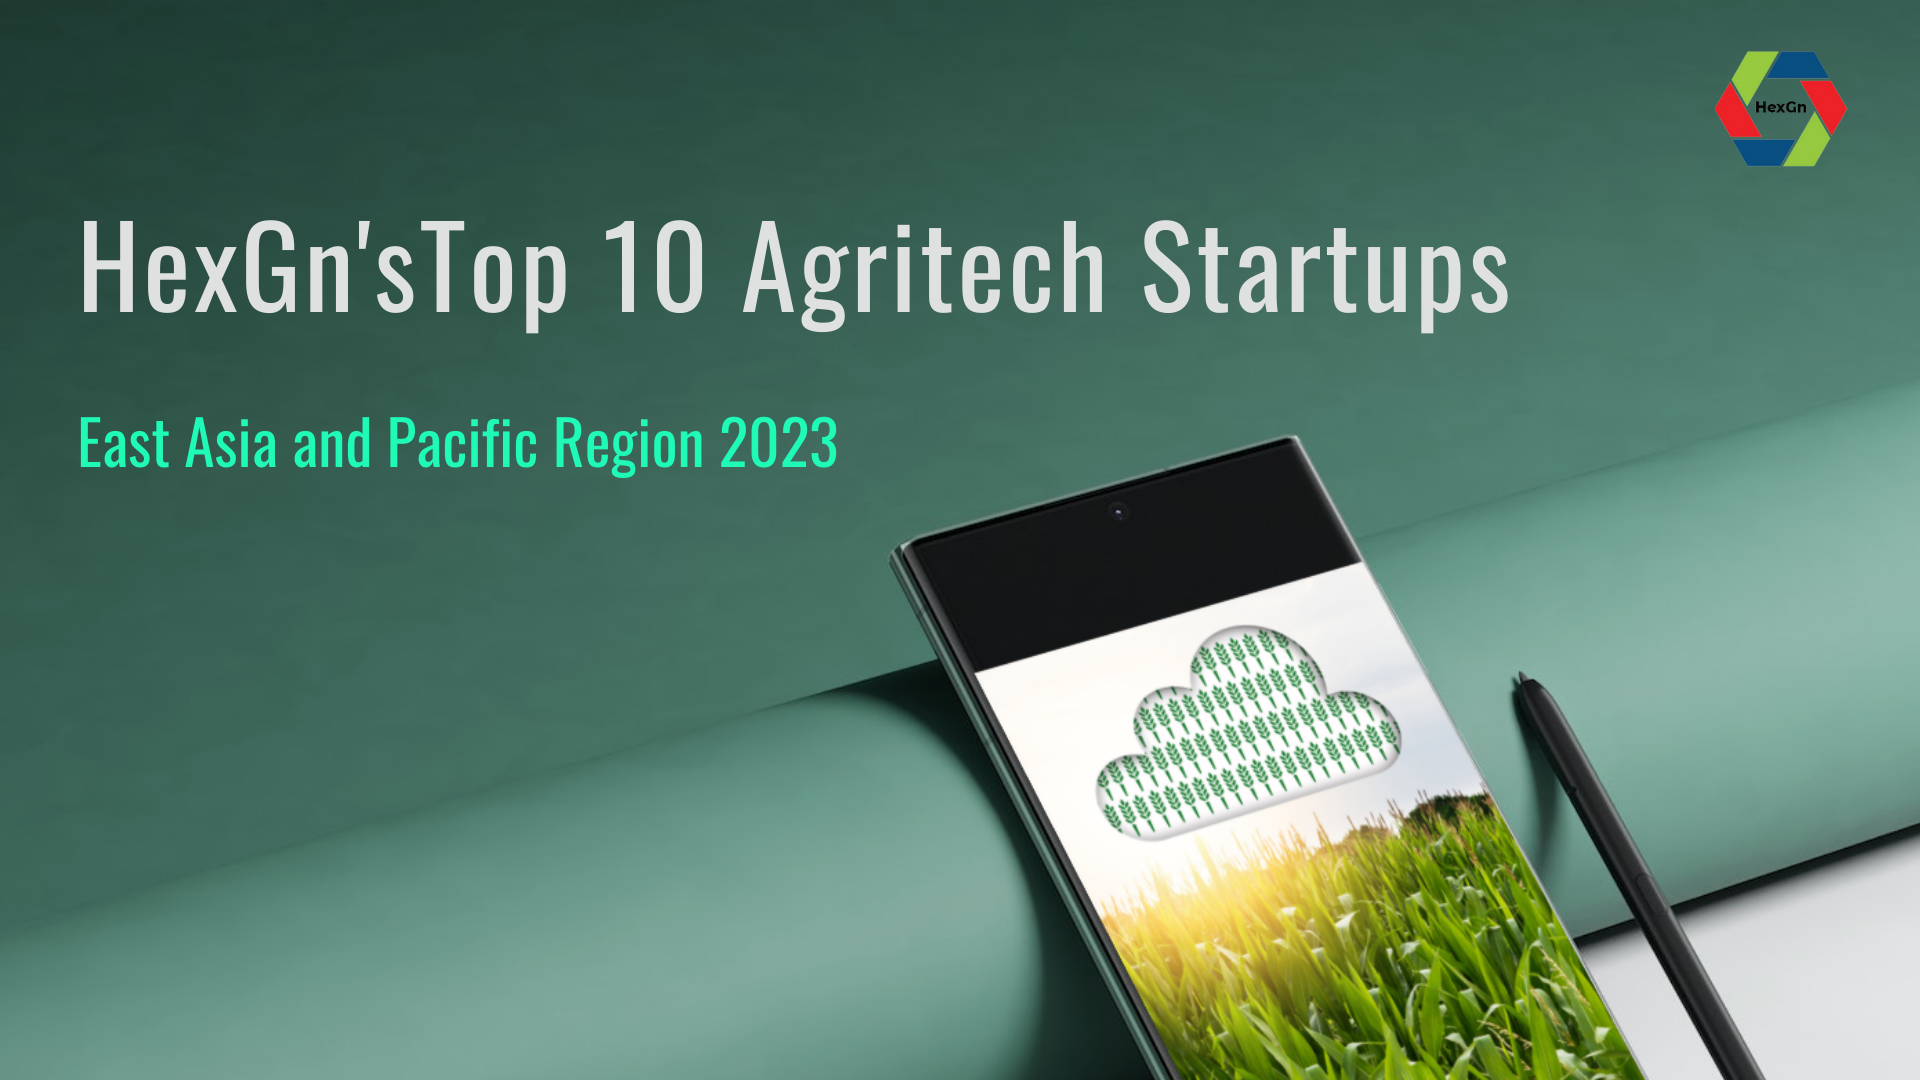 HexGn'sTop 10 Agritech Startups East Asia and Pacific Region 2023